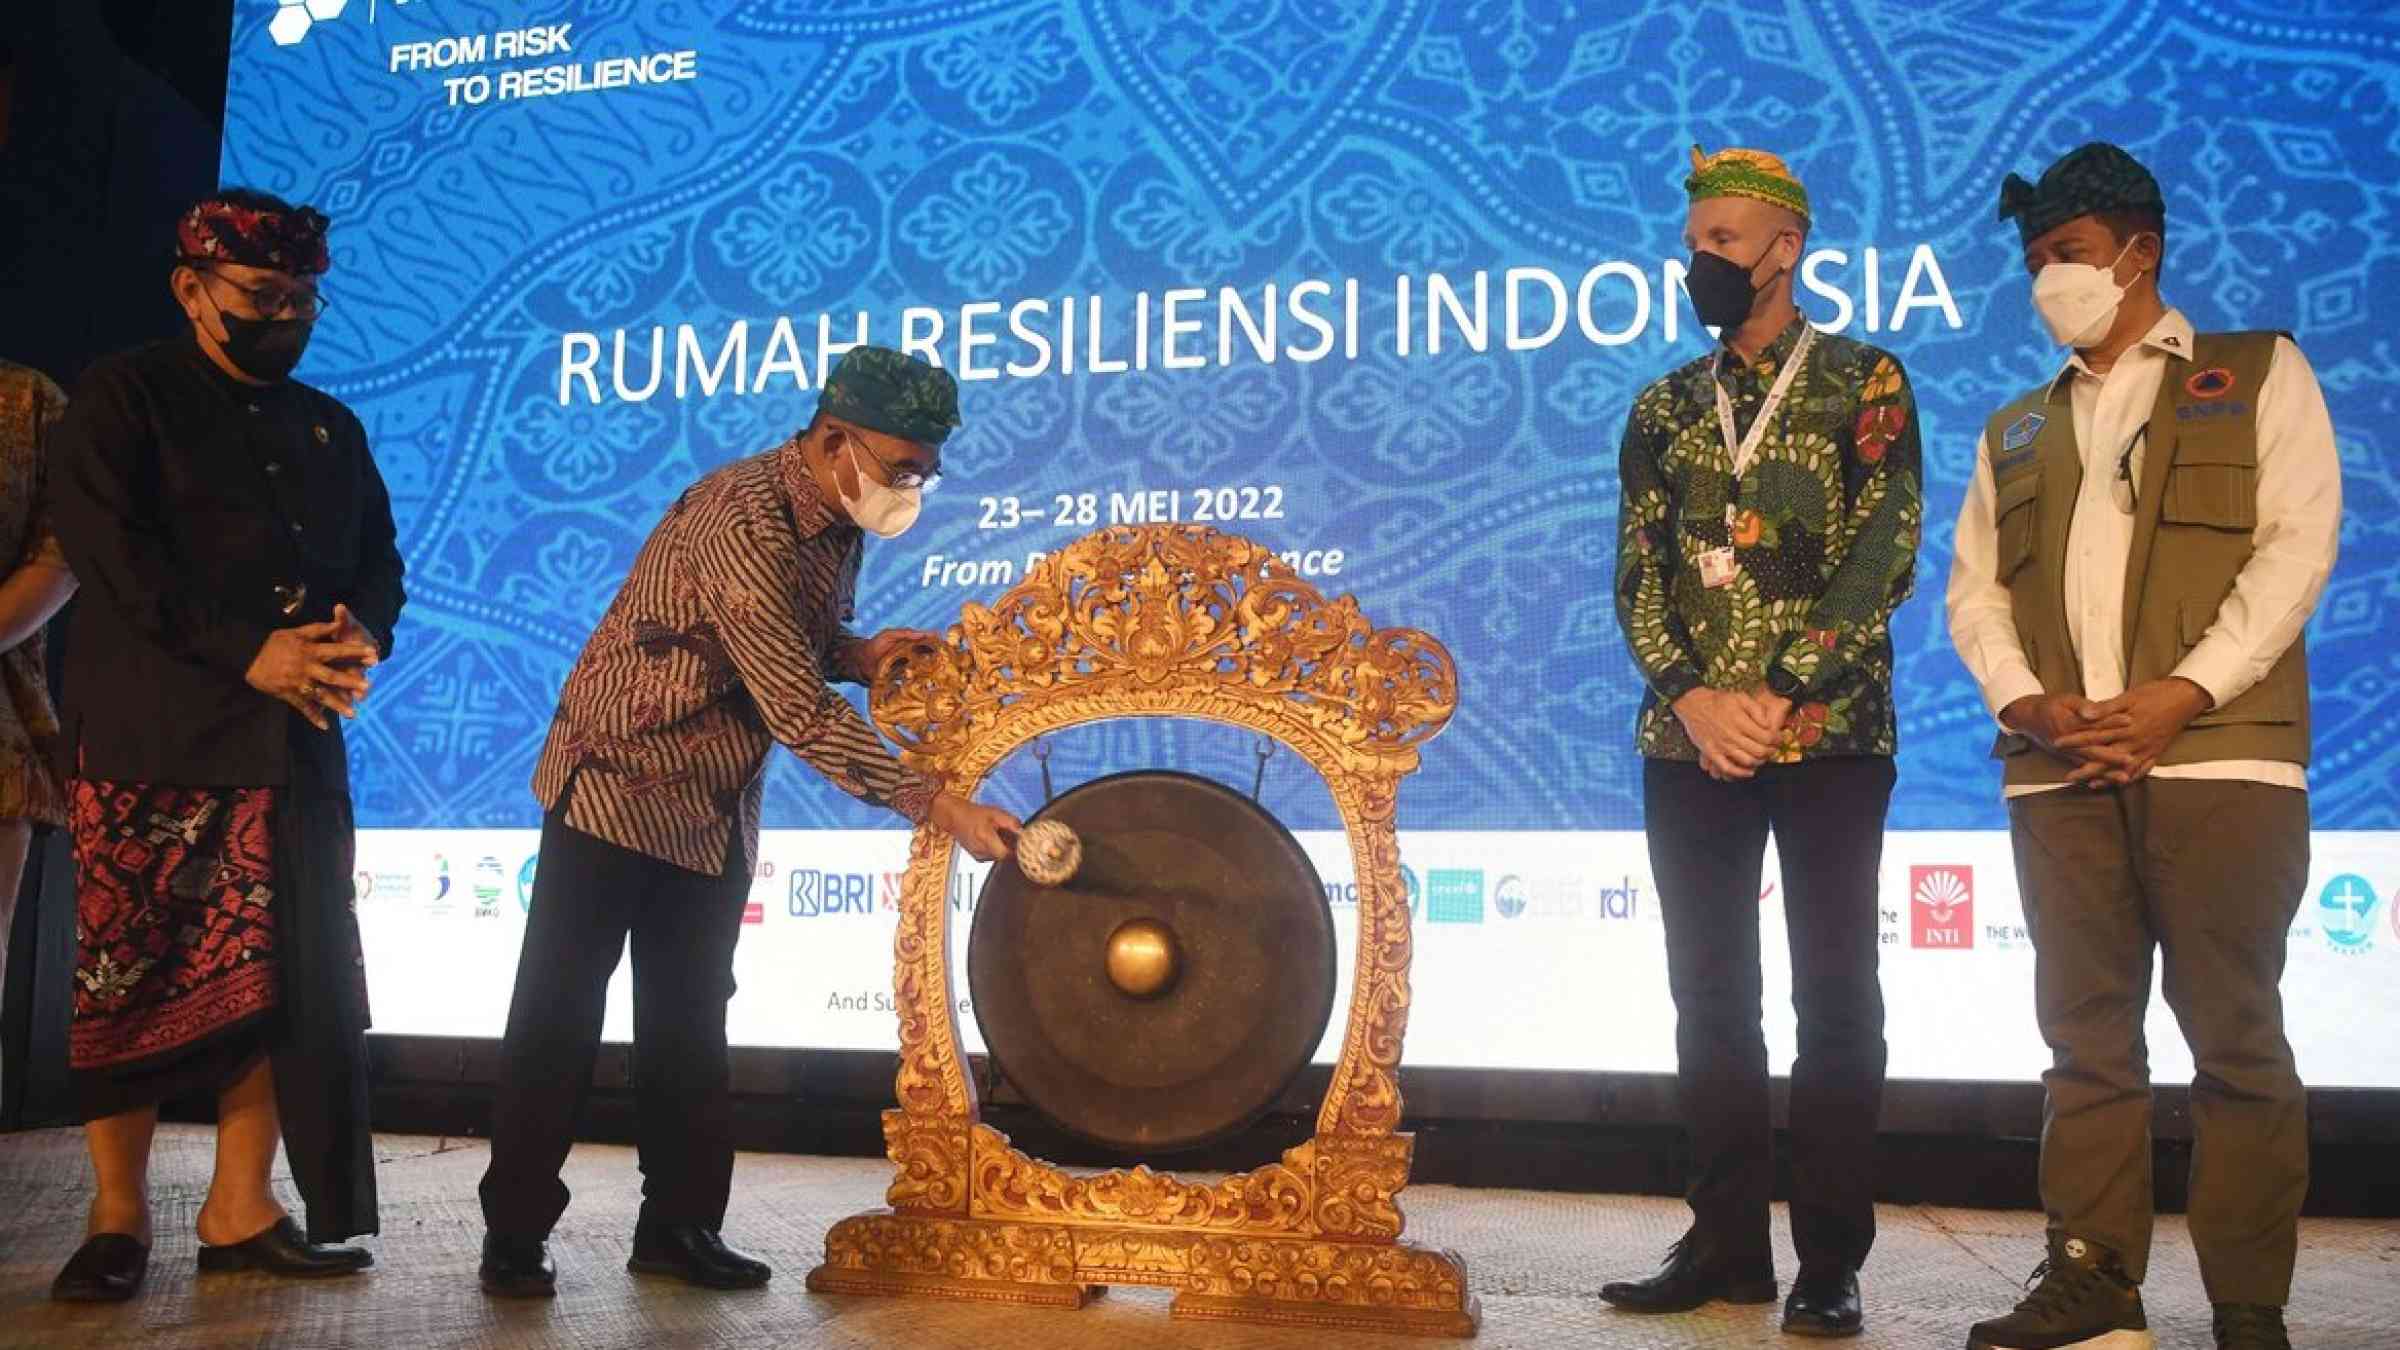 Coordinating Minister of the Ministry for Human Development and Culture, Muhadjir Effendy, and Head of BNPB, Major General TNI Suharyanto have inaugurated the 'Rumah Resiliensi Indonesia' at the Global Platform for Disaster Risk Reduction (GPDRR) 2022 in Nusa Dua, Bali, Monday (23/5/2022).